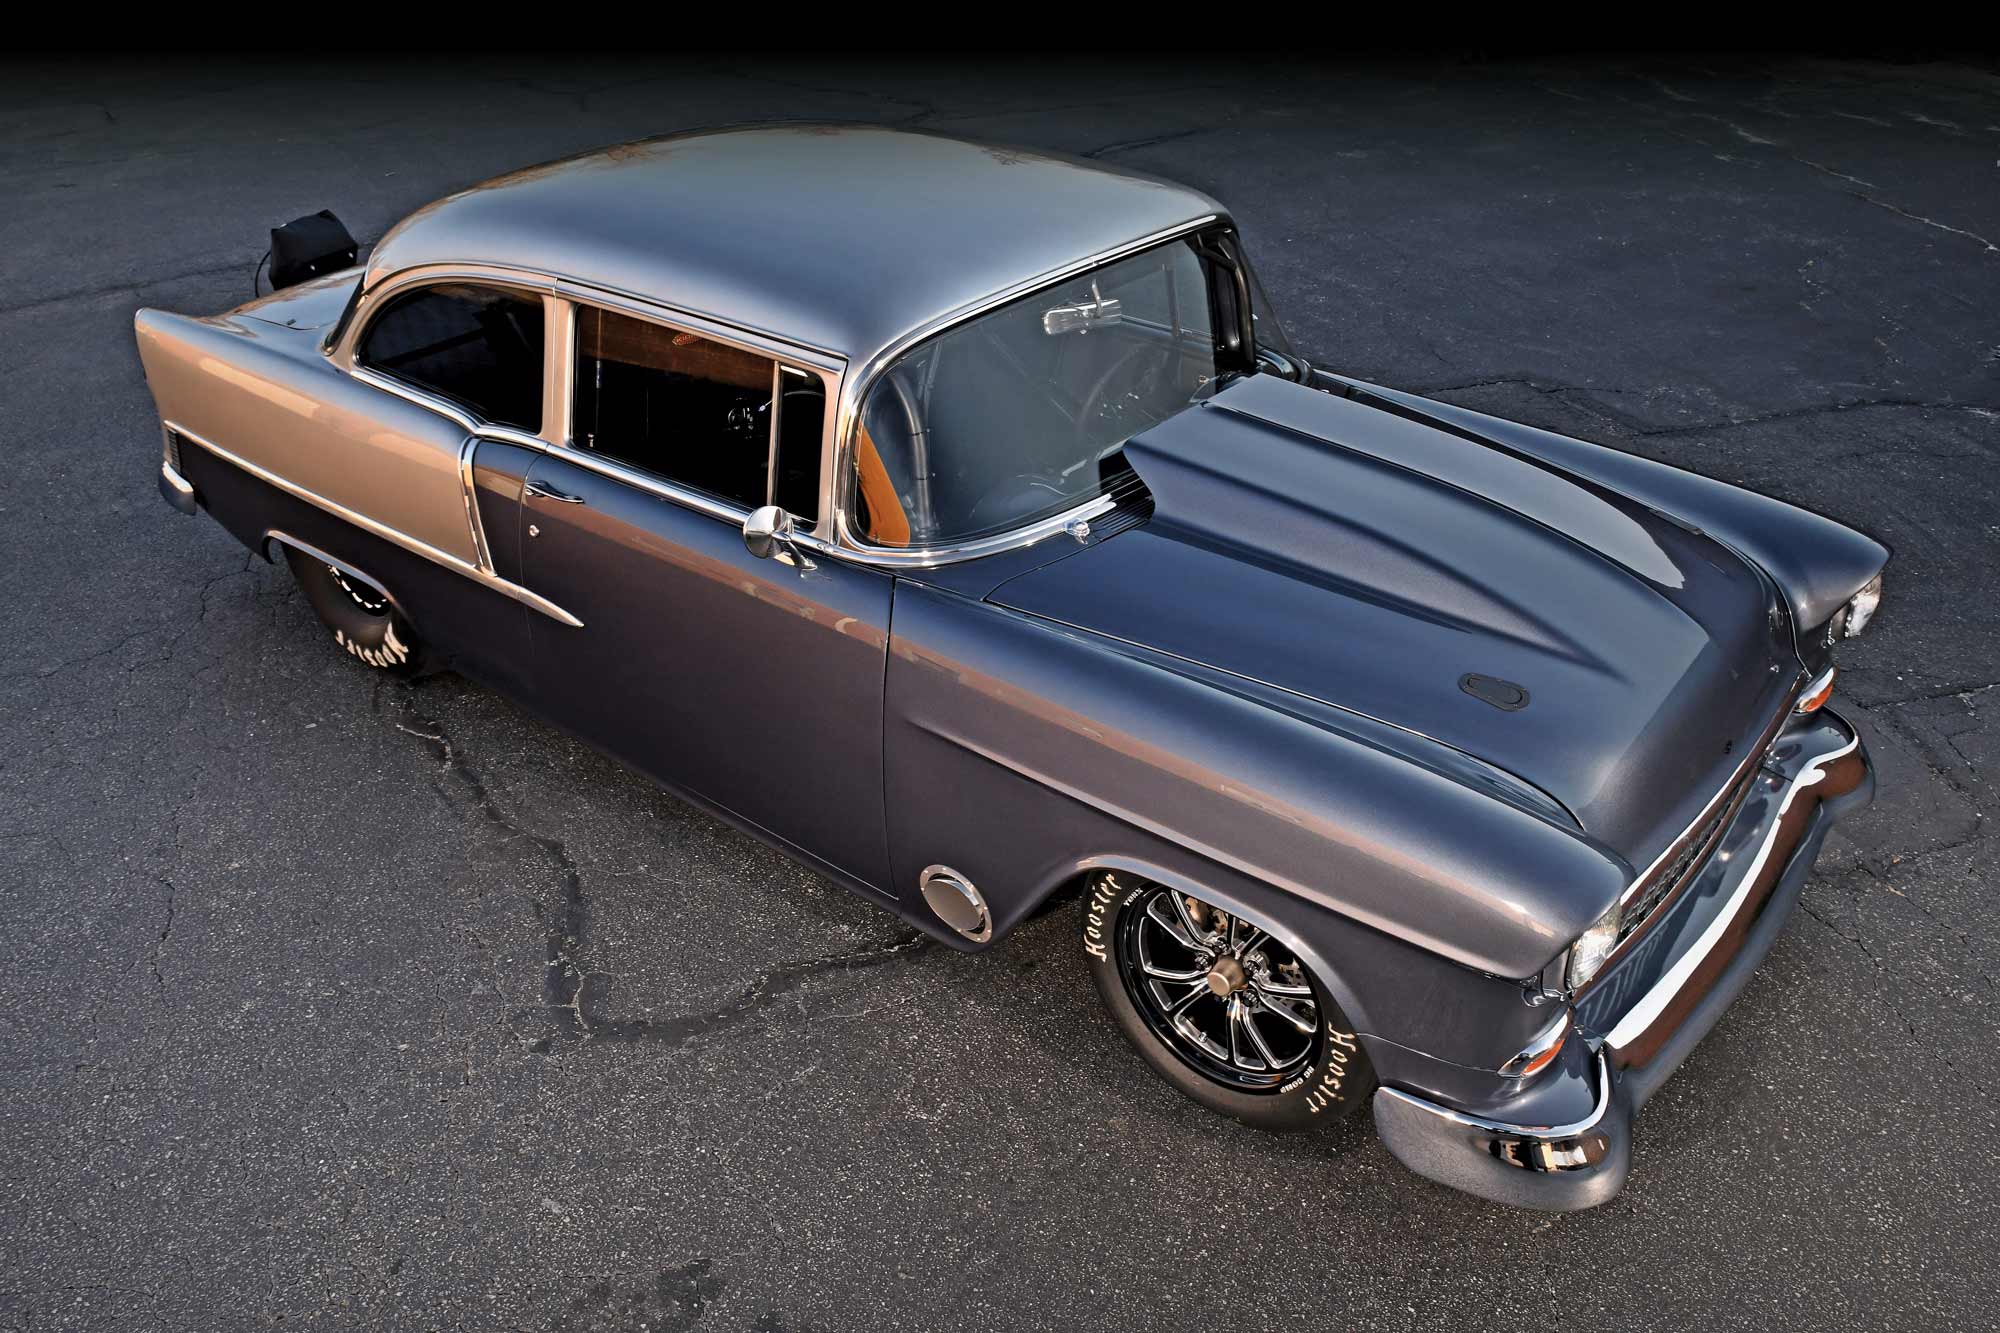 aerial view of silver ’55 Chevy Bel Air